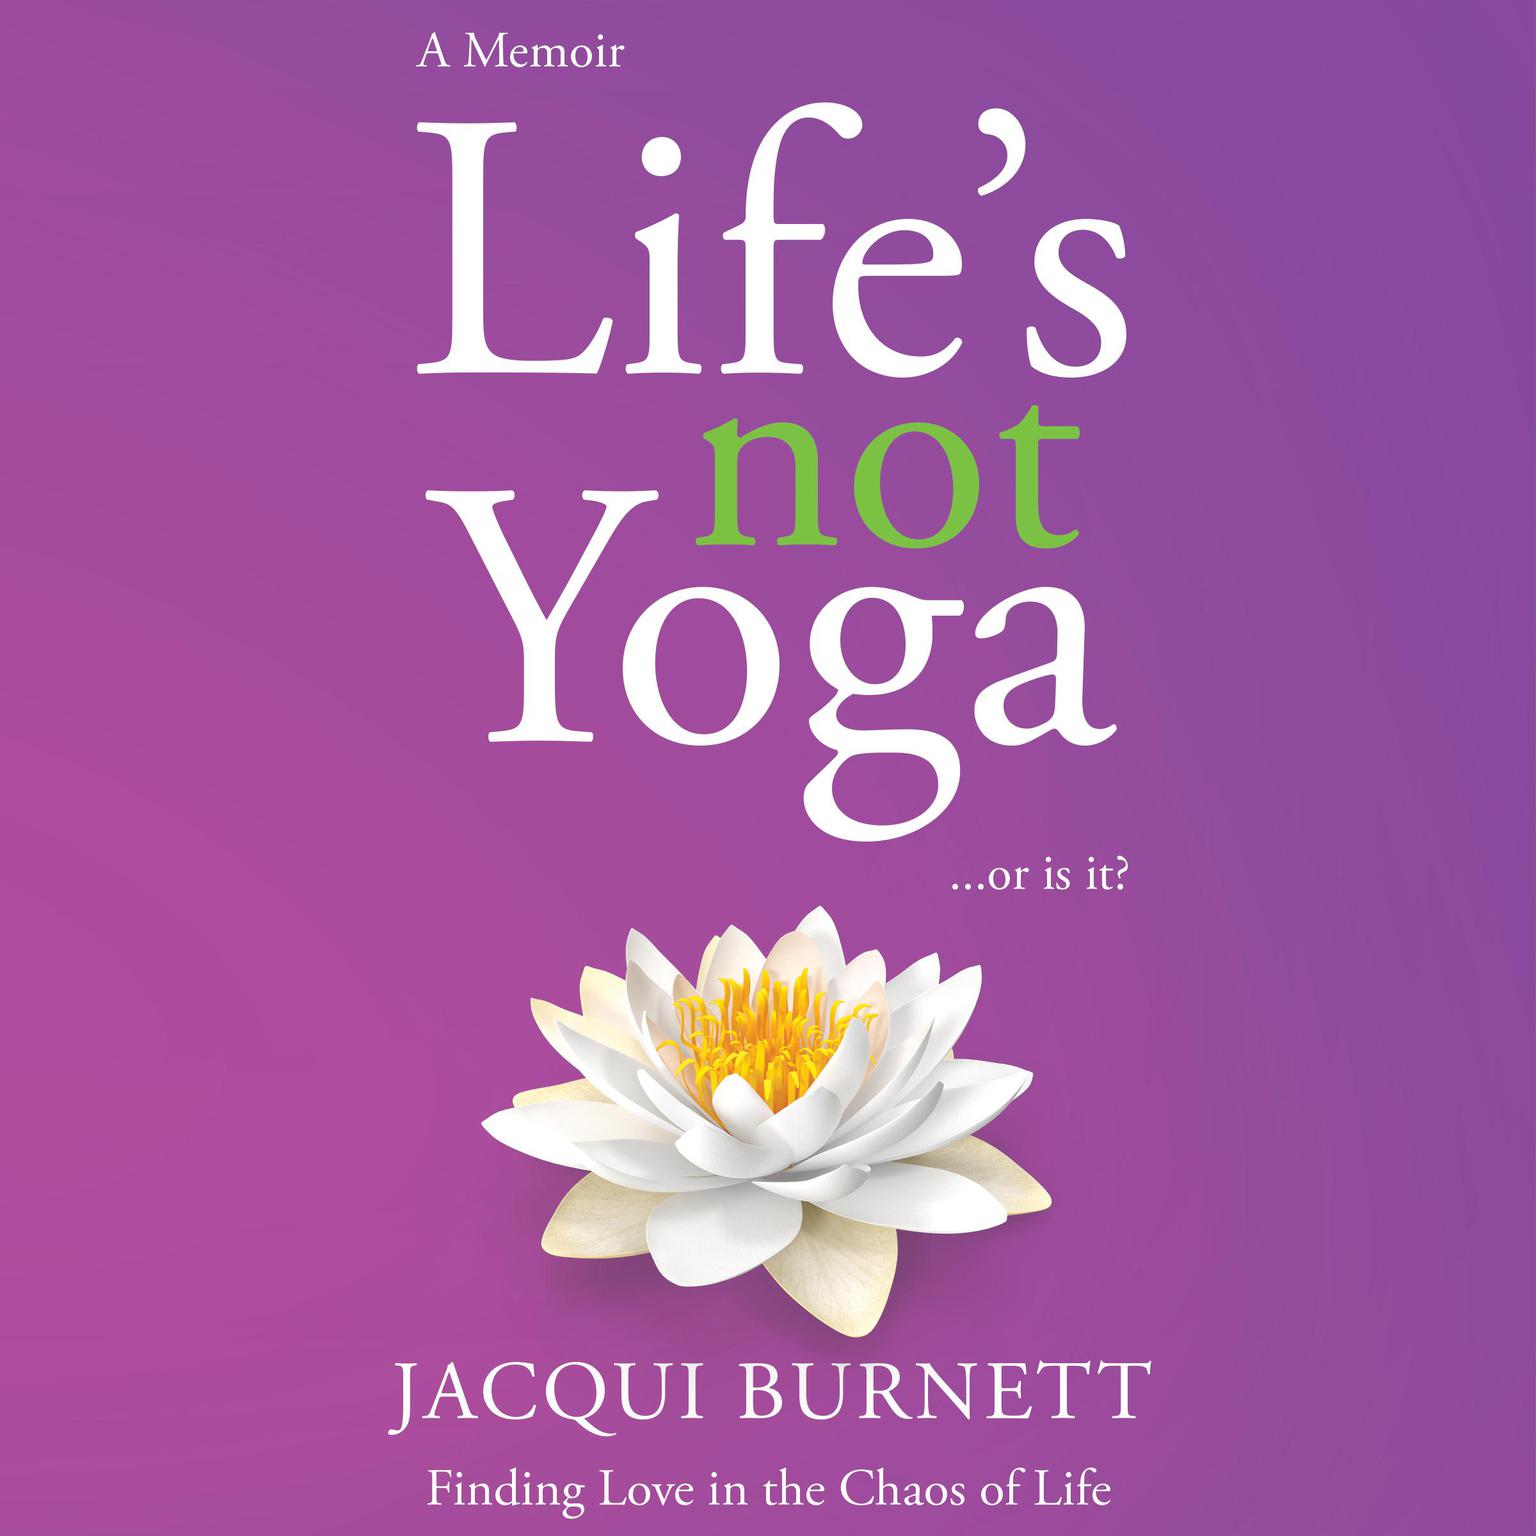 Lifes Not Yoga... or is it?: Finding Love in the Chaos of Life Audiobook, by Jacqui Burnett